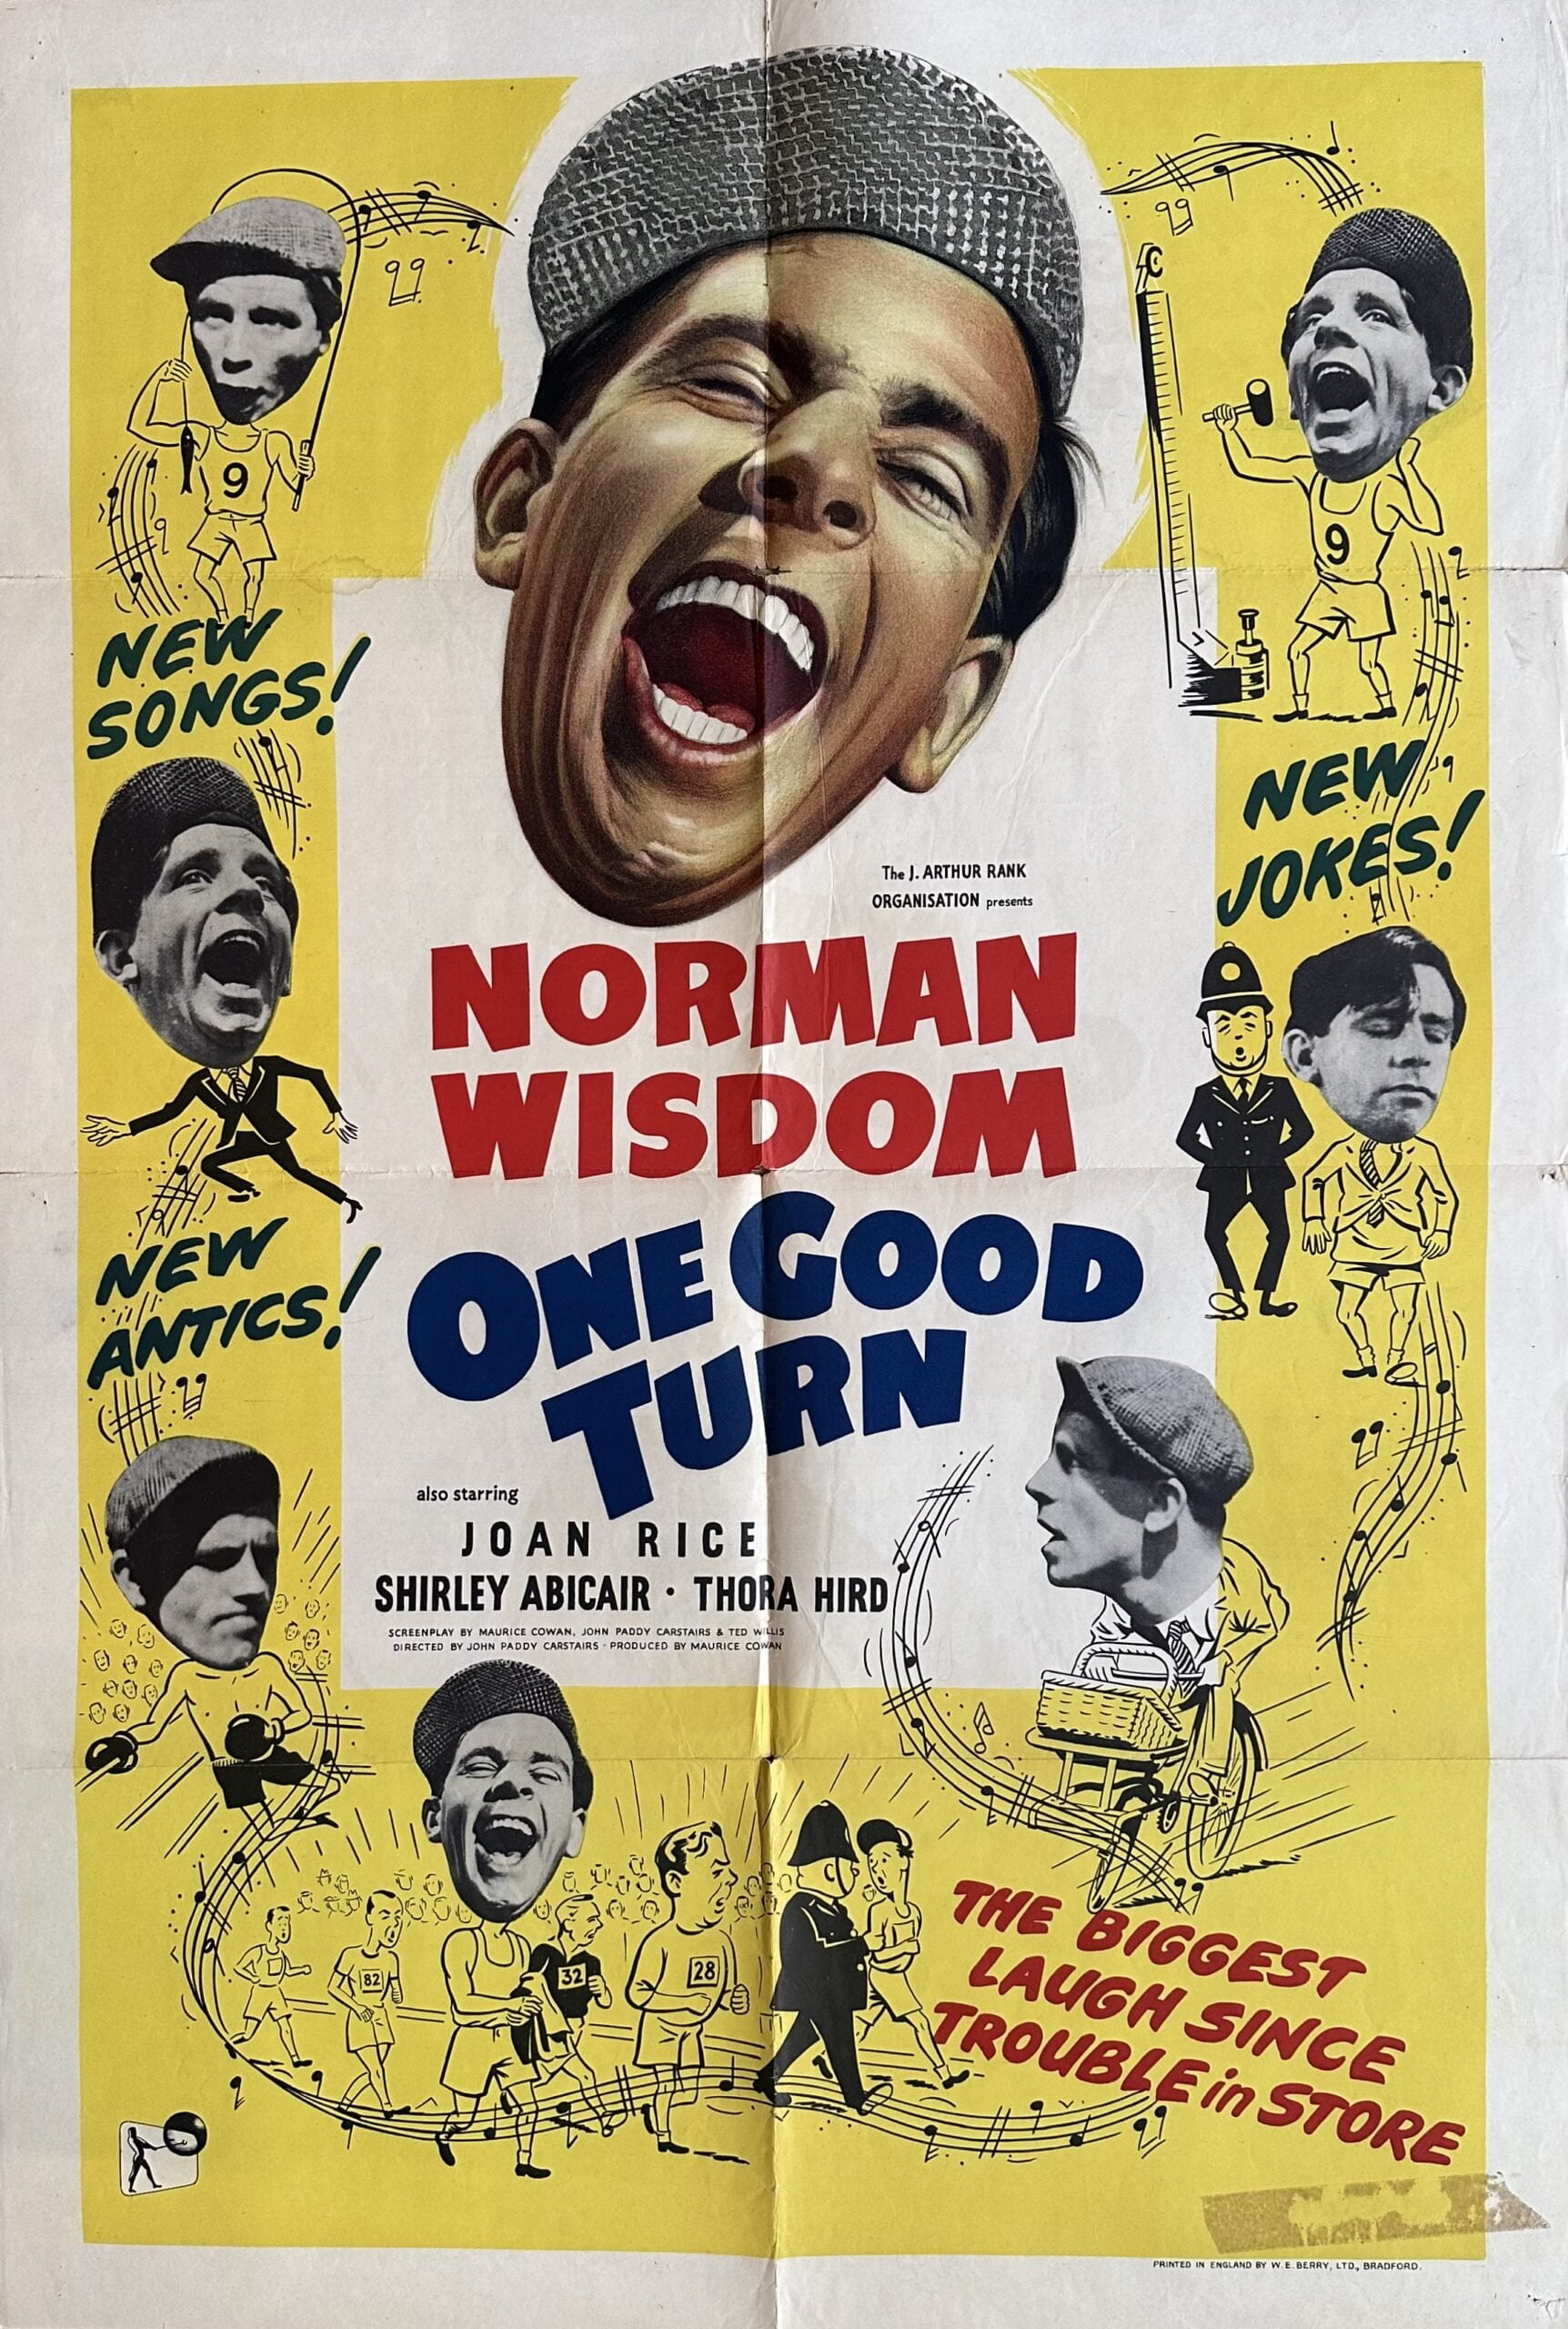 Original vintage cinema movie poster for the Norman Wisdom comedy, One Good Turn